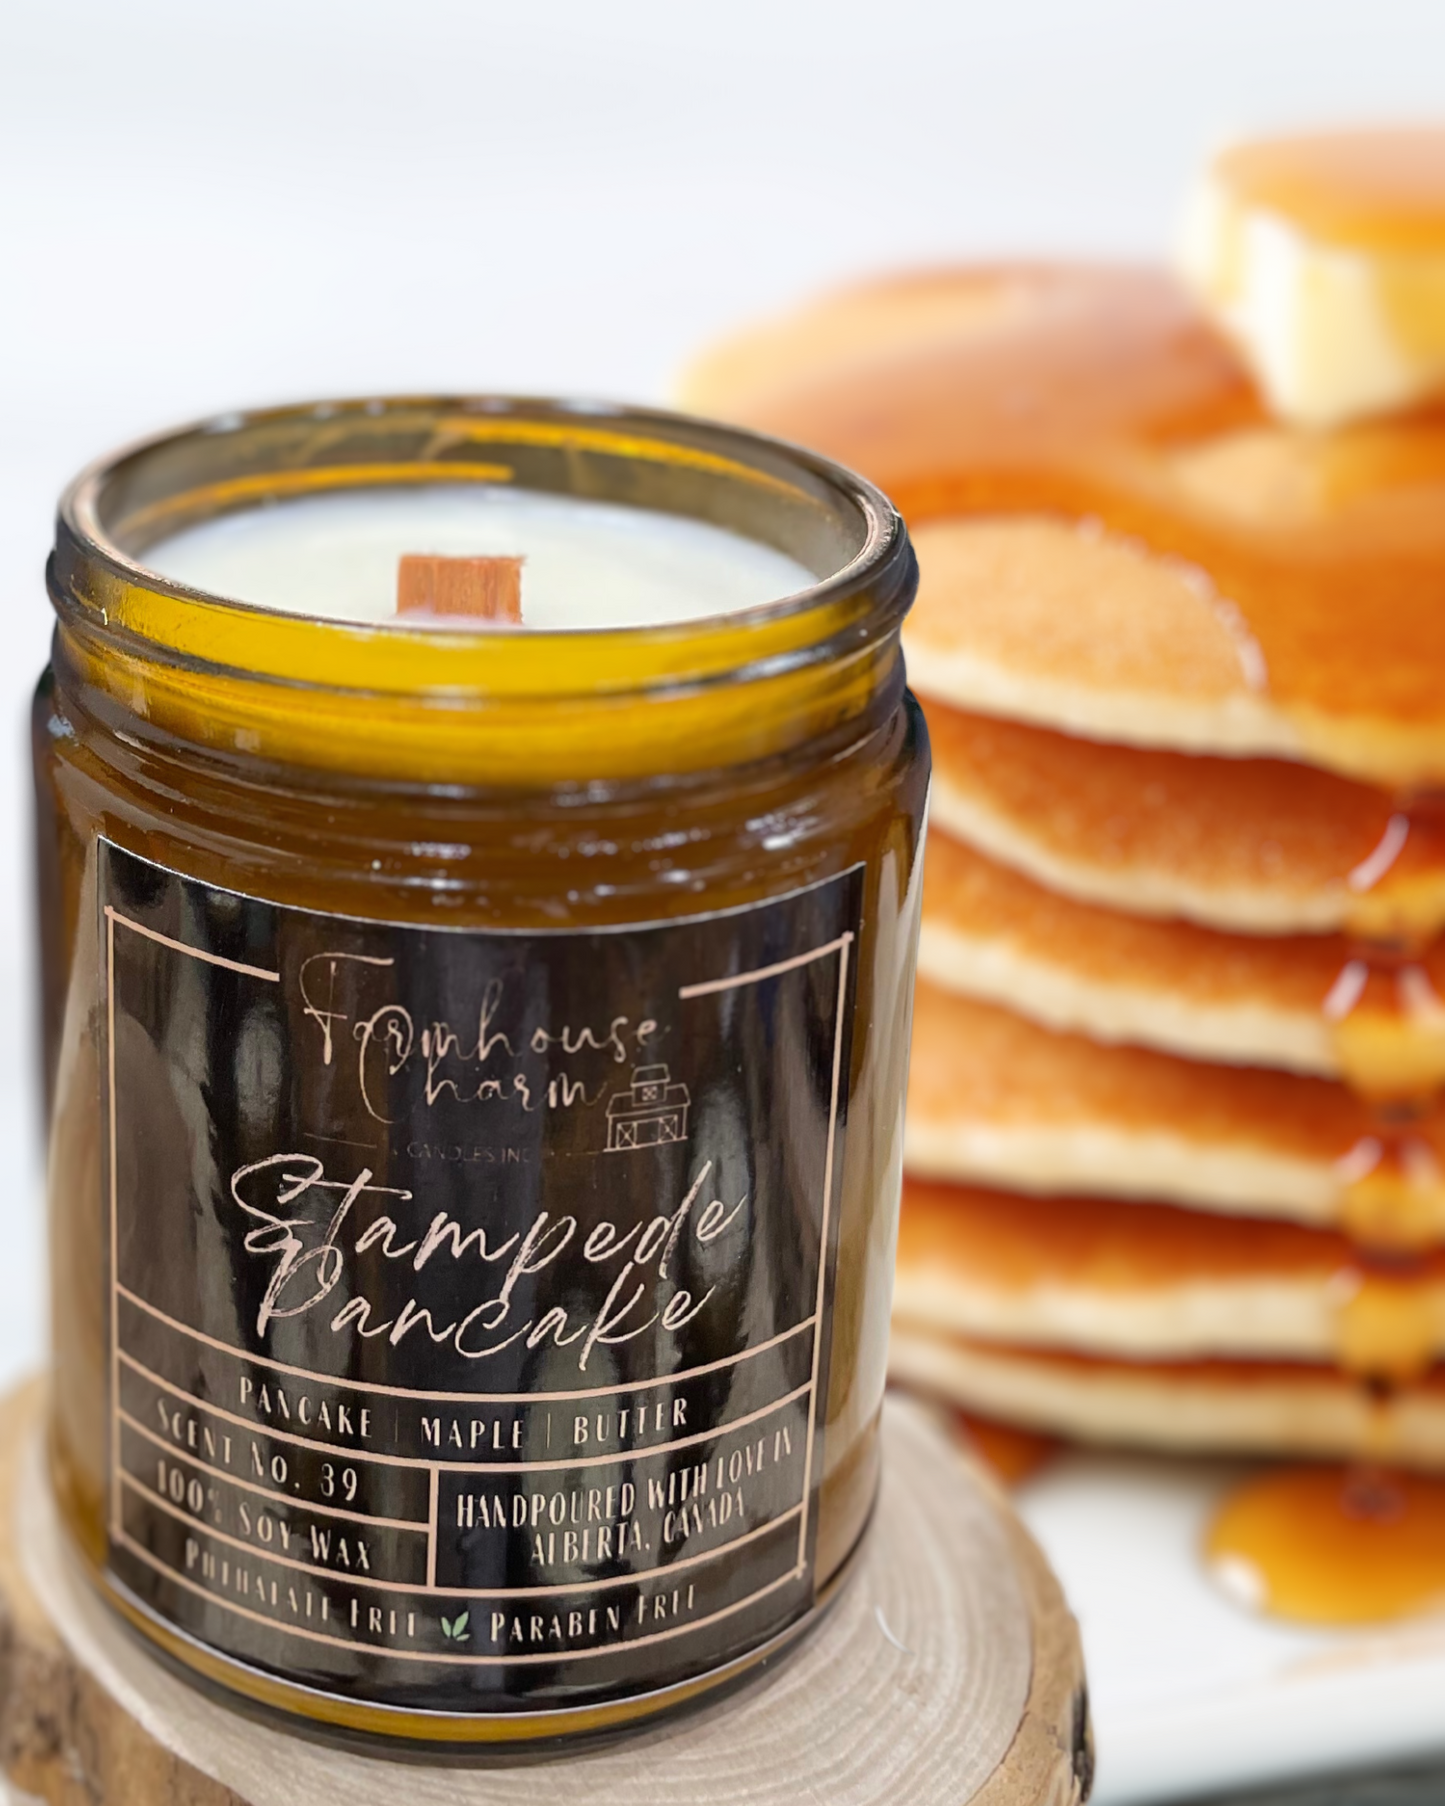 The Stampede Pancake - Farmhouse Charm Soy Candle is back by popular demand! Our customers couldn't get enough of this Calgary Stampede-inspired candle from last year. The warm buttery pancake scent is perfectly complemented with the sweet aroma of maple syrup, creating a delicious fragrance that will make your home smell like a classic breakfast. It's the perfect candle to celebrate the Stampede and create a warm, welcoming ambiance in your home. www.farmhousecharmcandles.com